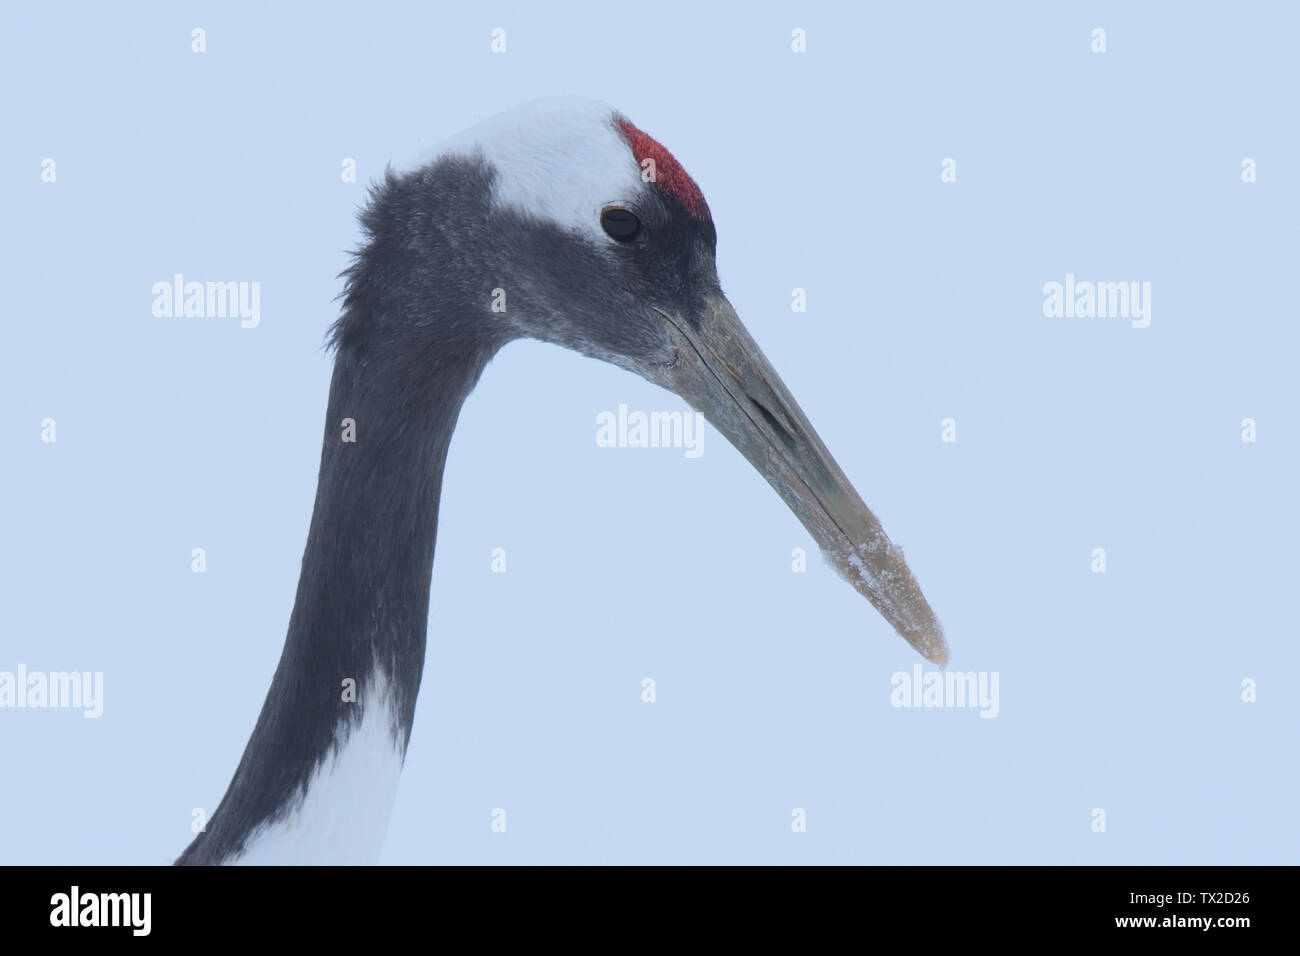 Red-crowned Crane (Grus japonensis) head against a snowy background on Hokkaido Island, Japan Stock Photo